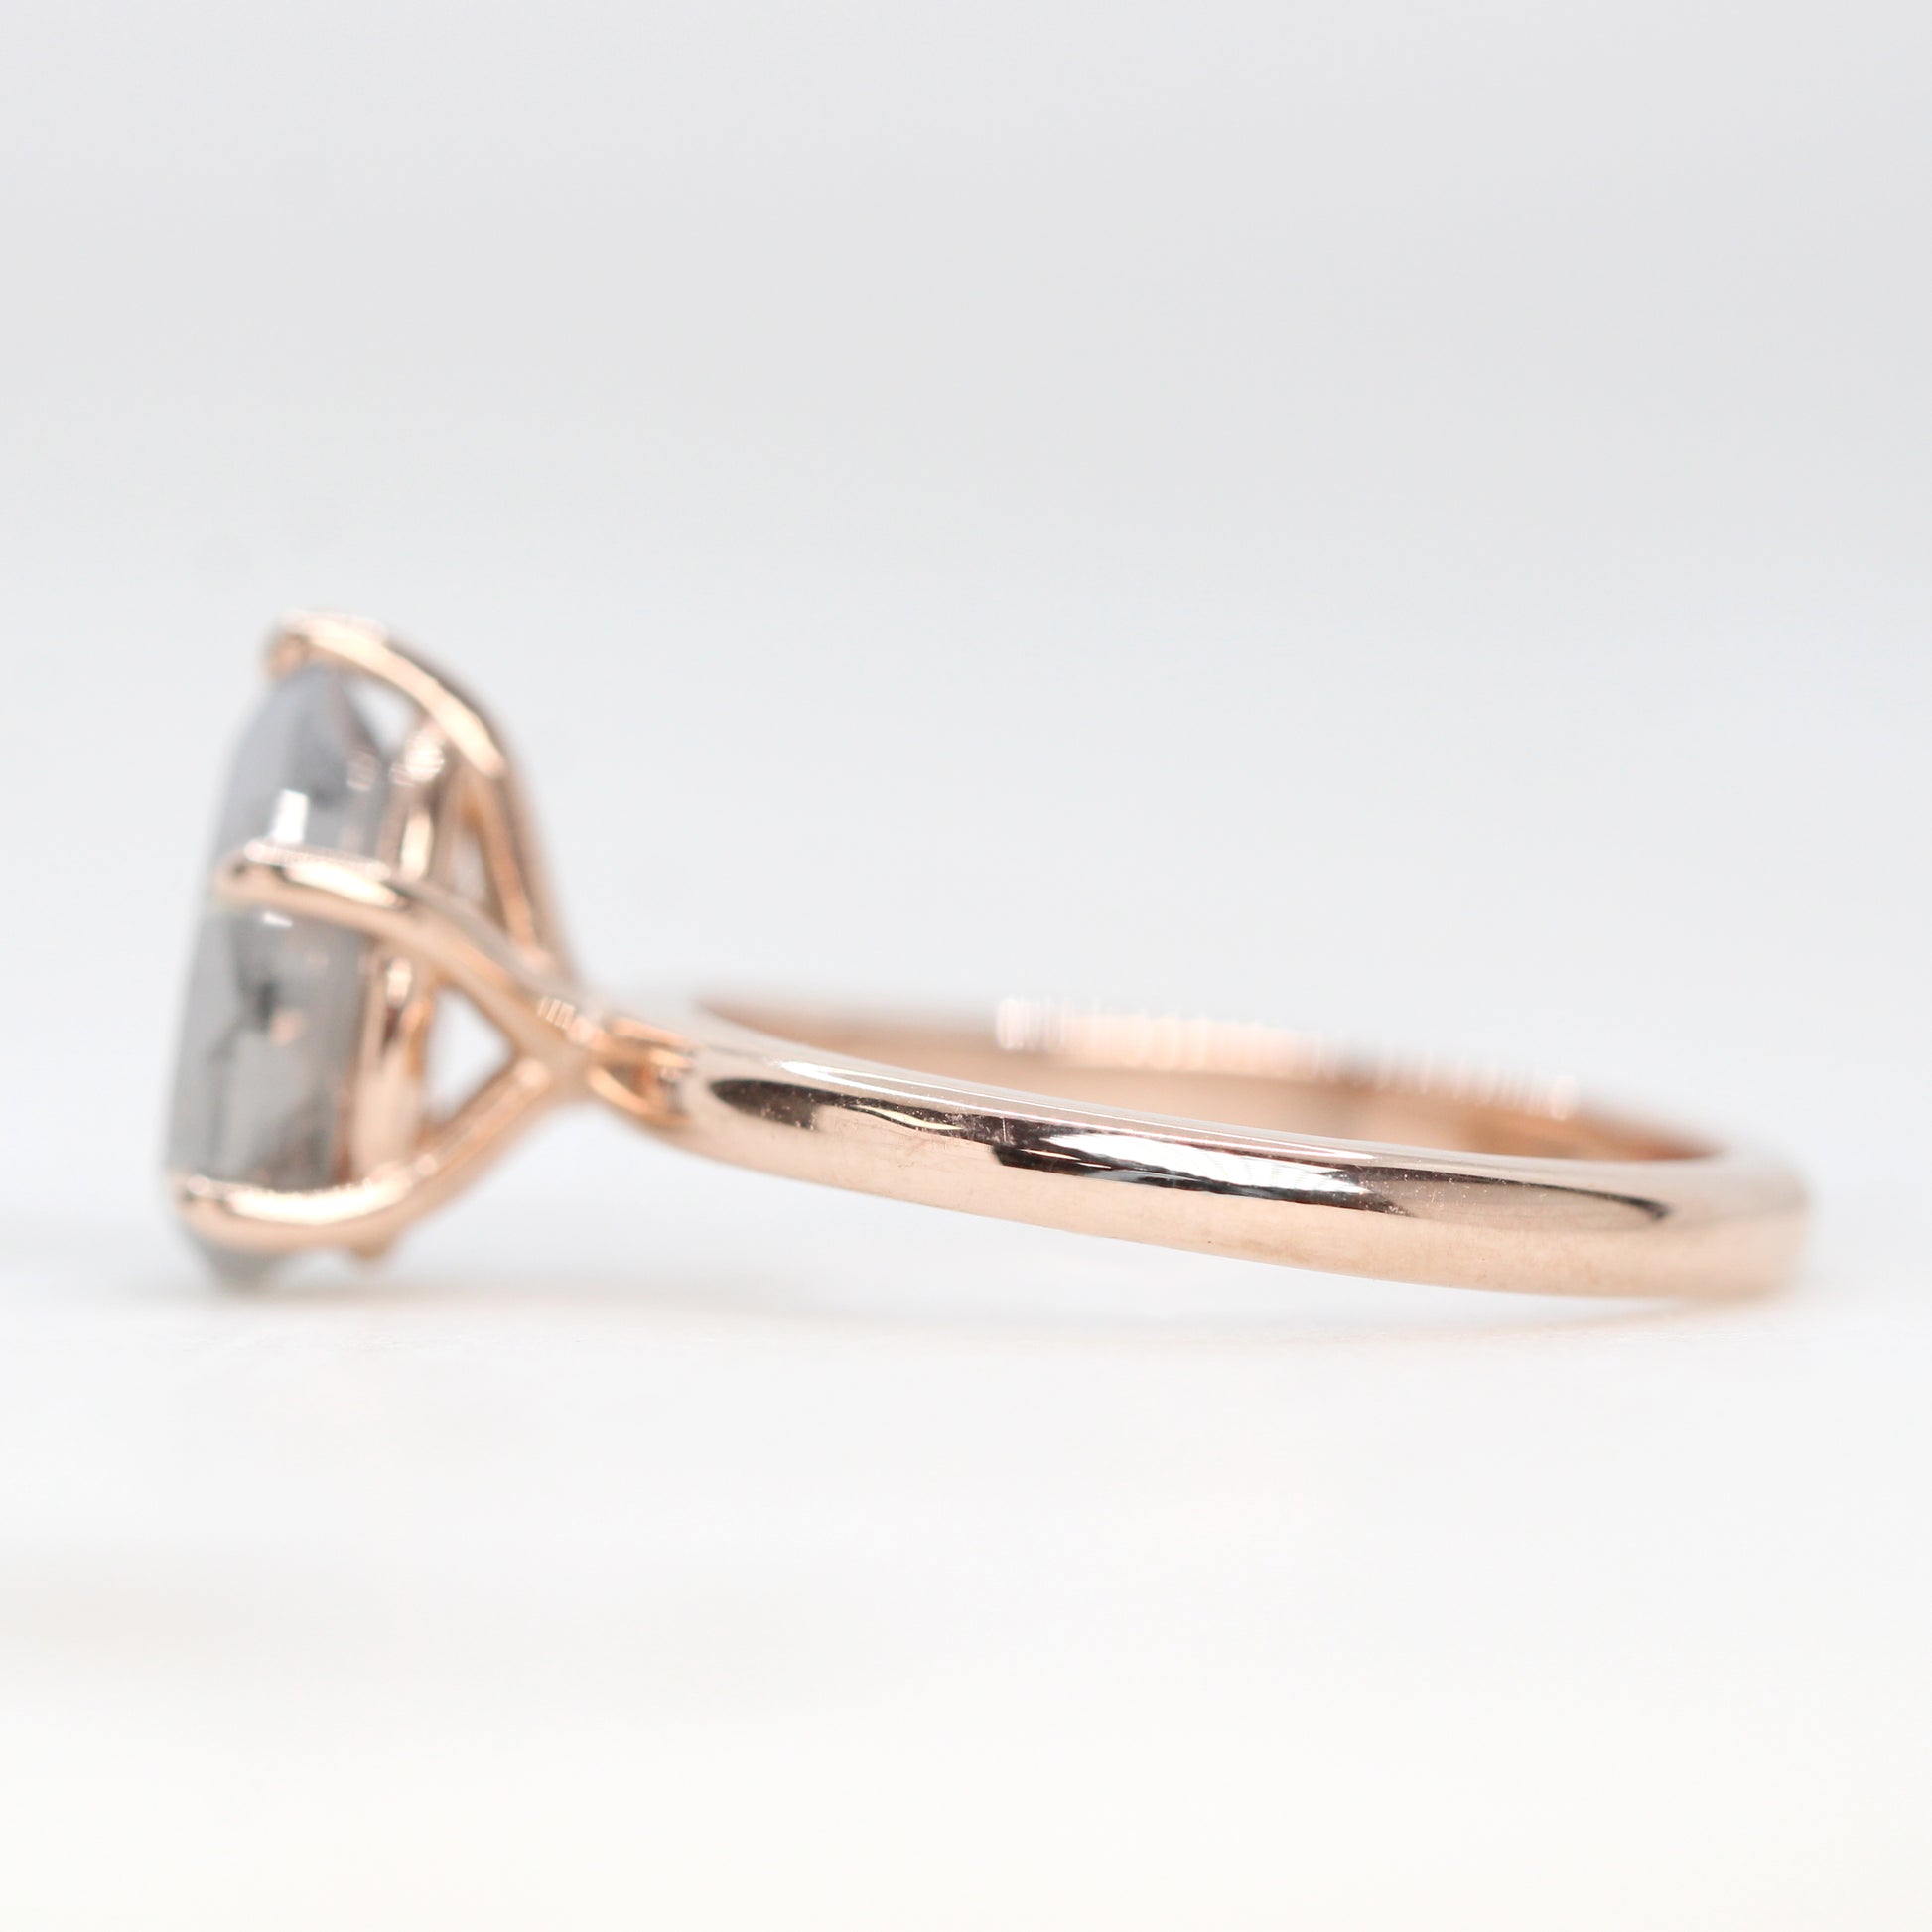 Charlotte Ring with a 2.31 Carat Pear Misty Gray Salt and Pepper Diamond in 14k Rose Gold - Ready to Size and Ship - Midwinter Co. Alternative Bridal Rings and Modern Fine Jewelry